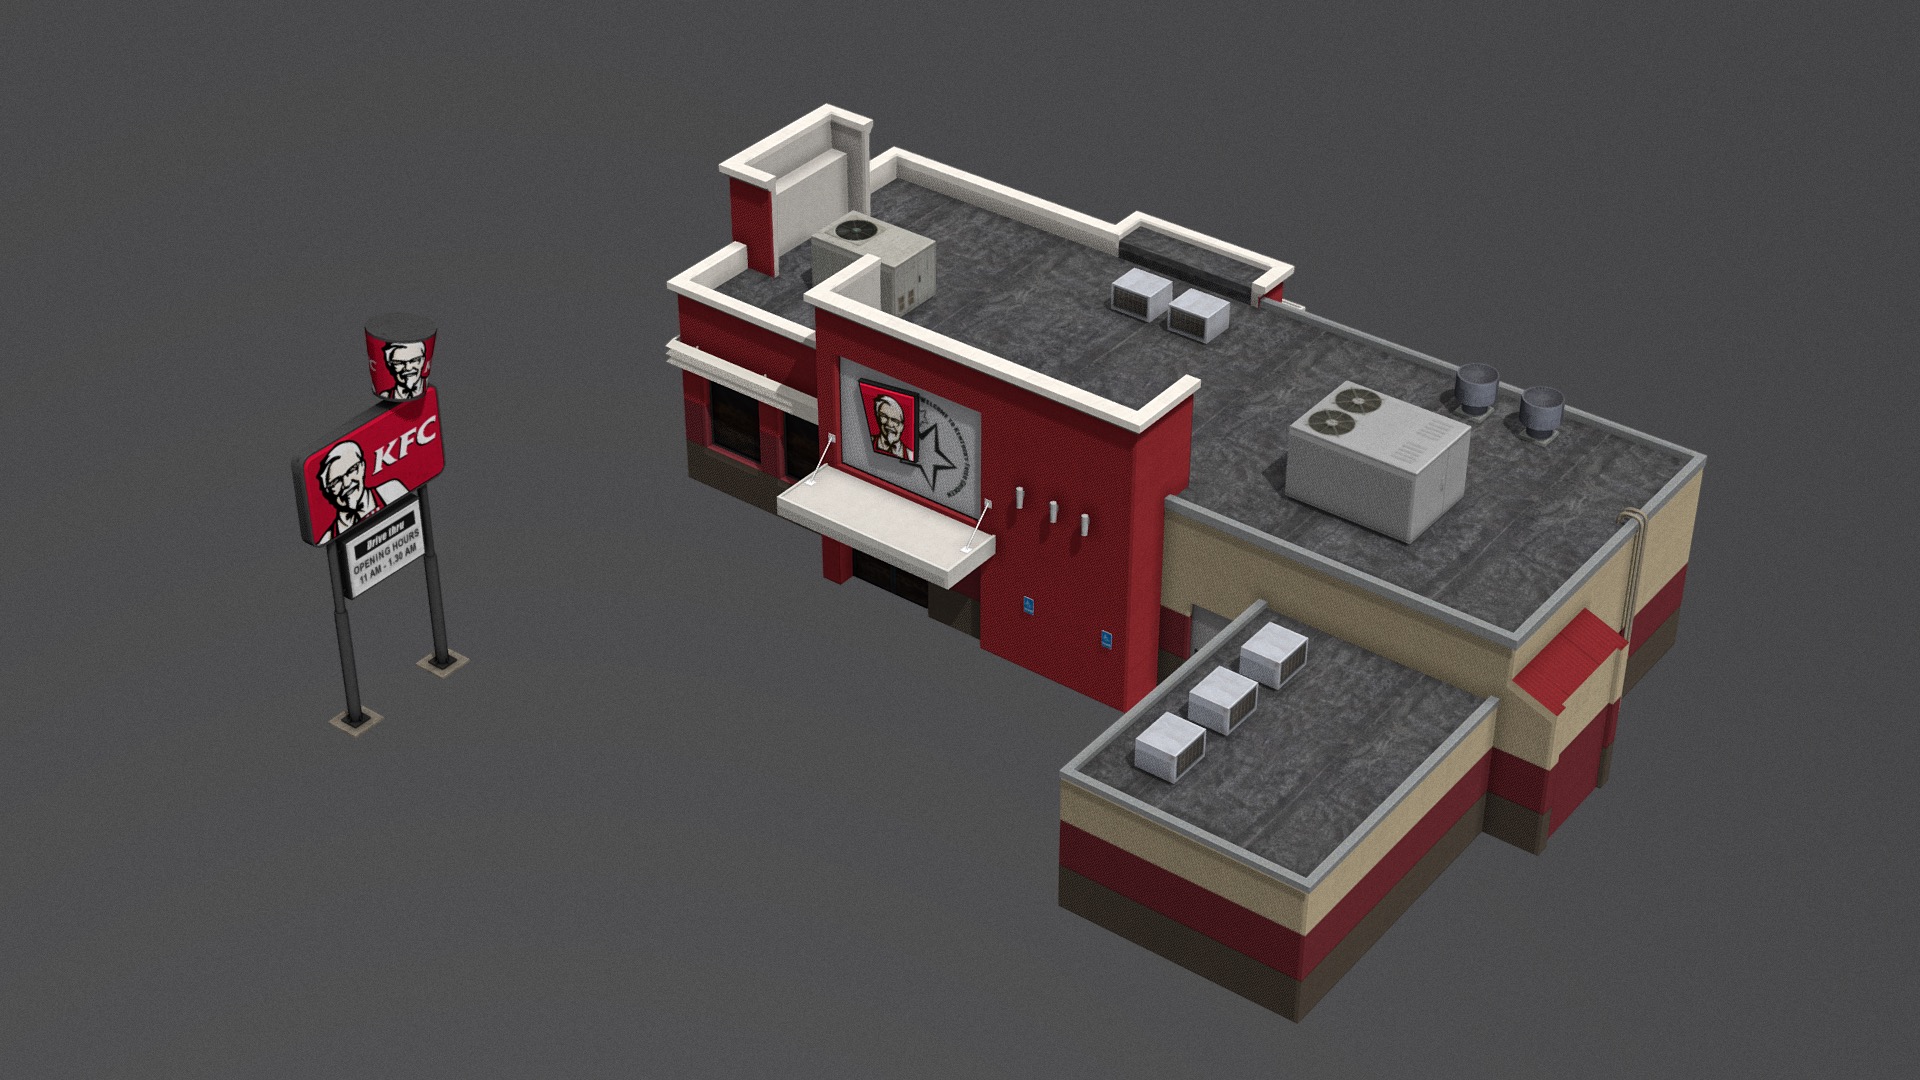 3D model KFC - This is a 3D model of the KFC. The 3D model is about a toy building with a red and white box on top.